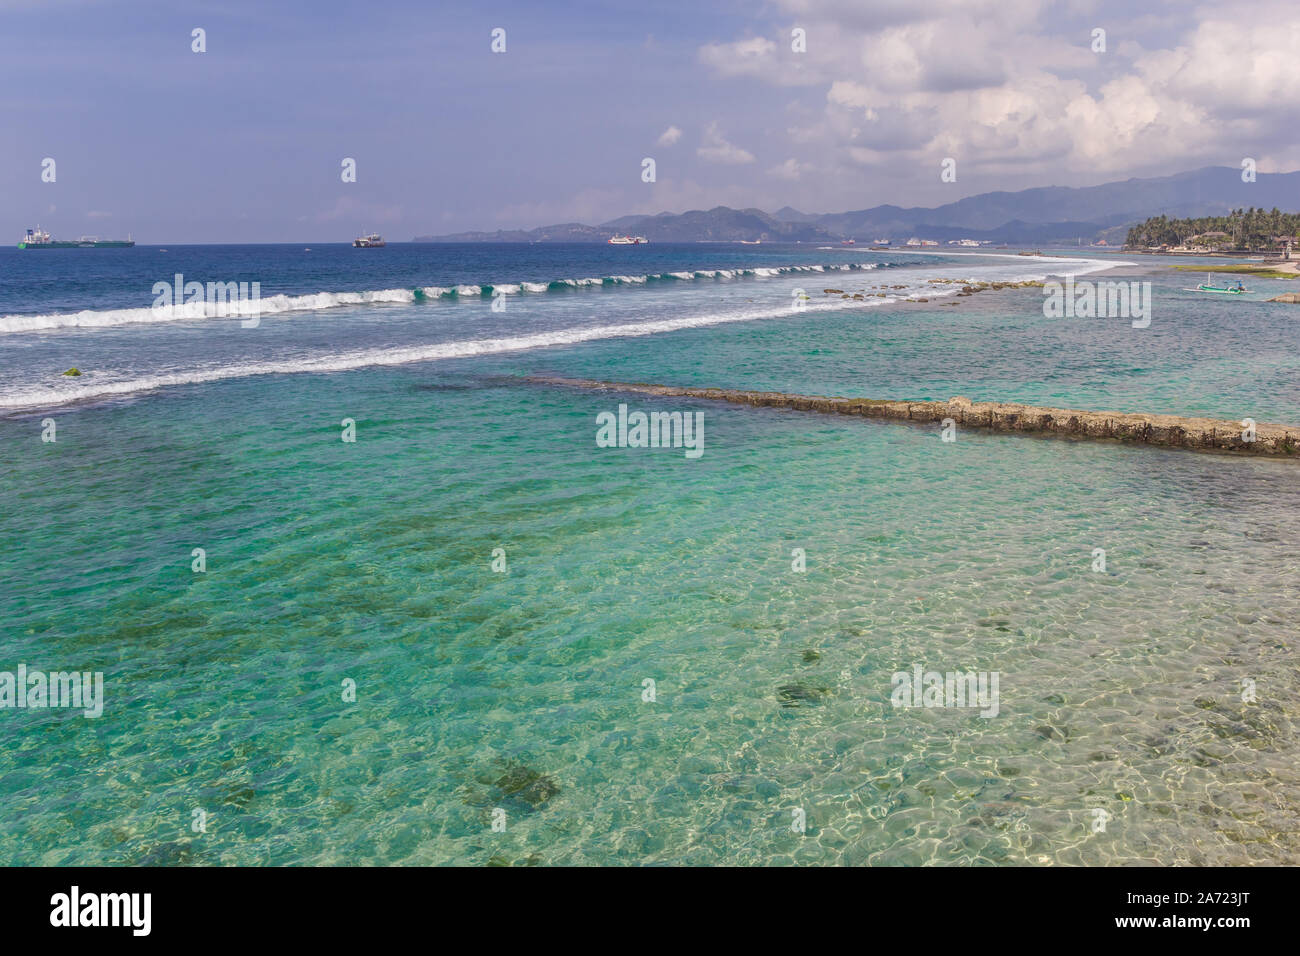 Turquoise water of the Candidasa coast on Bali, Indonesia Stock Photo